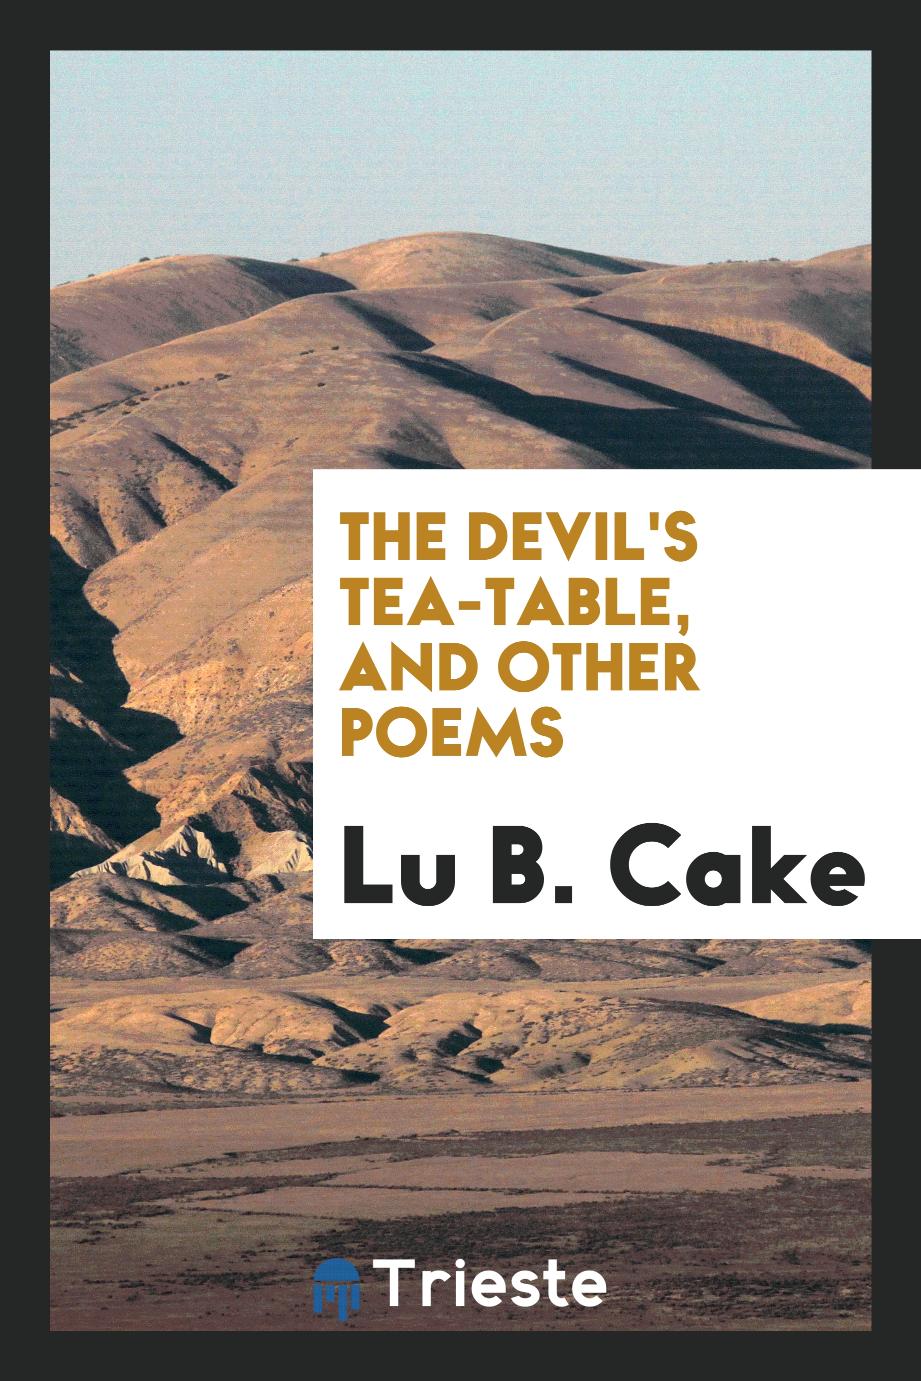 The Devil's tea-table, and other poems